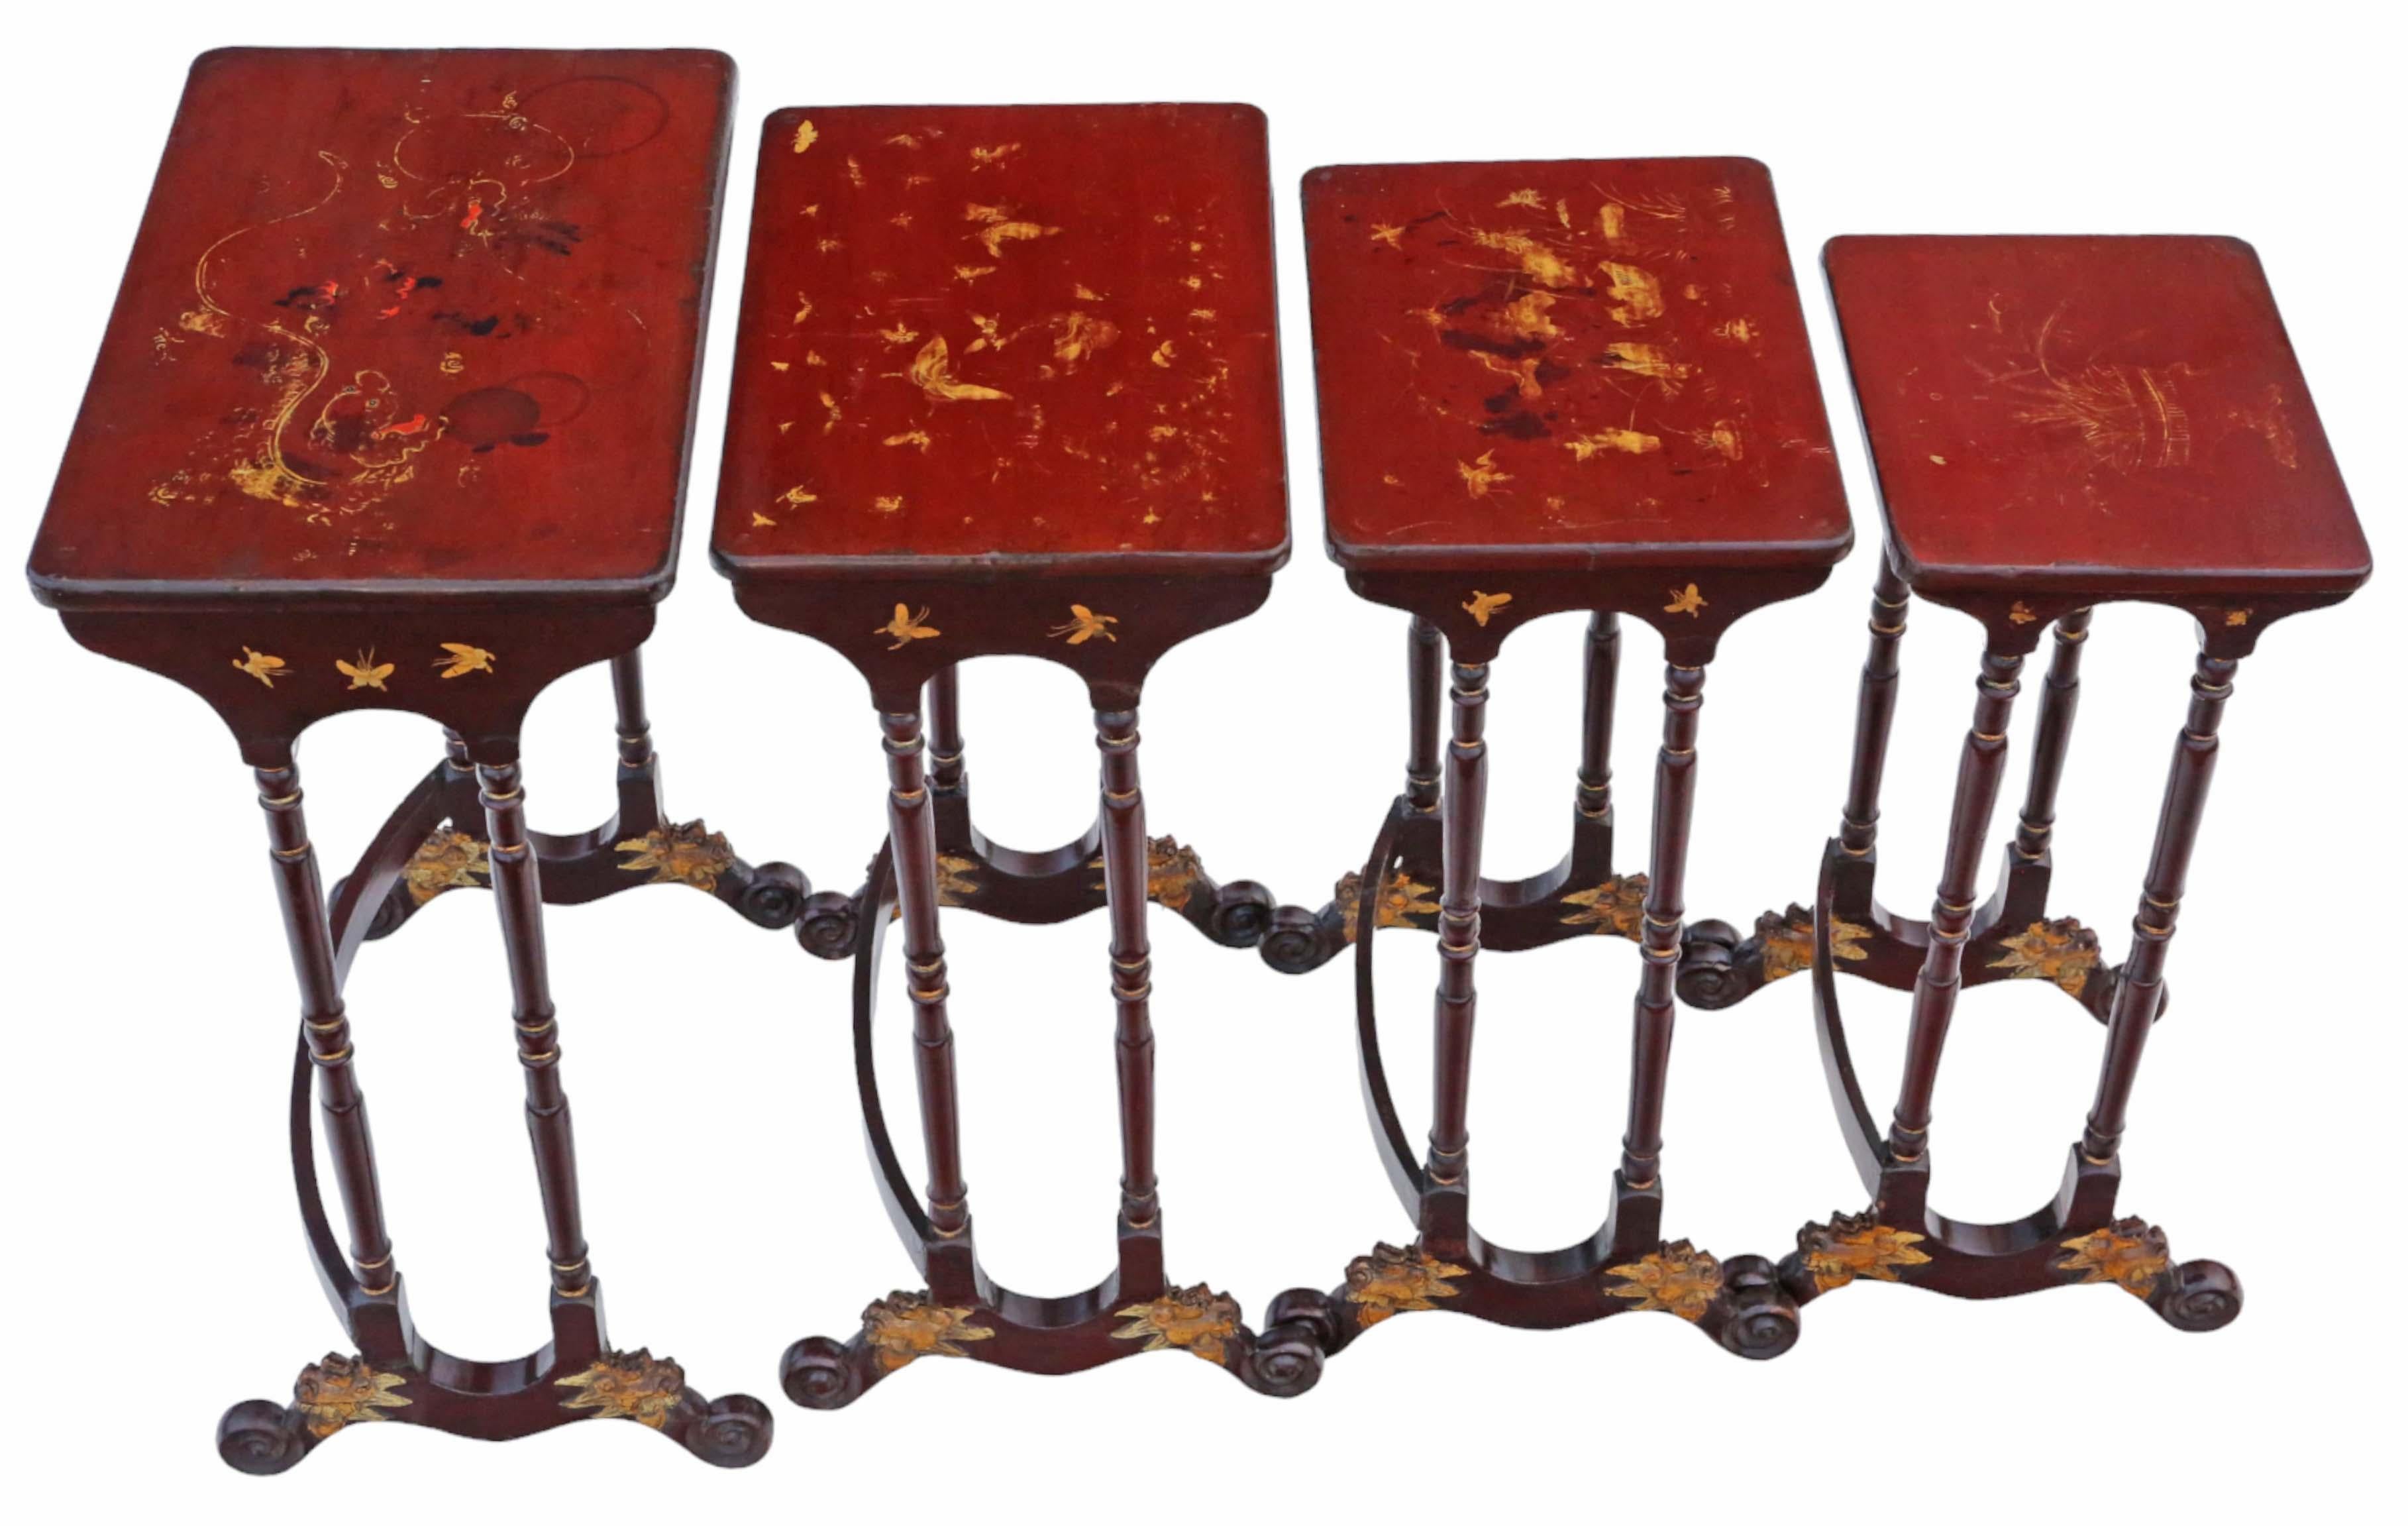 Wood Antique fine quality 19th Century Chinoiserie decorated lacquer nest of 4 tables For Sale